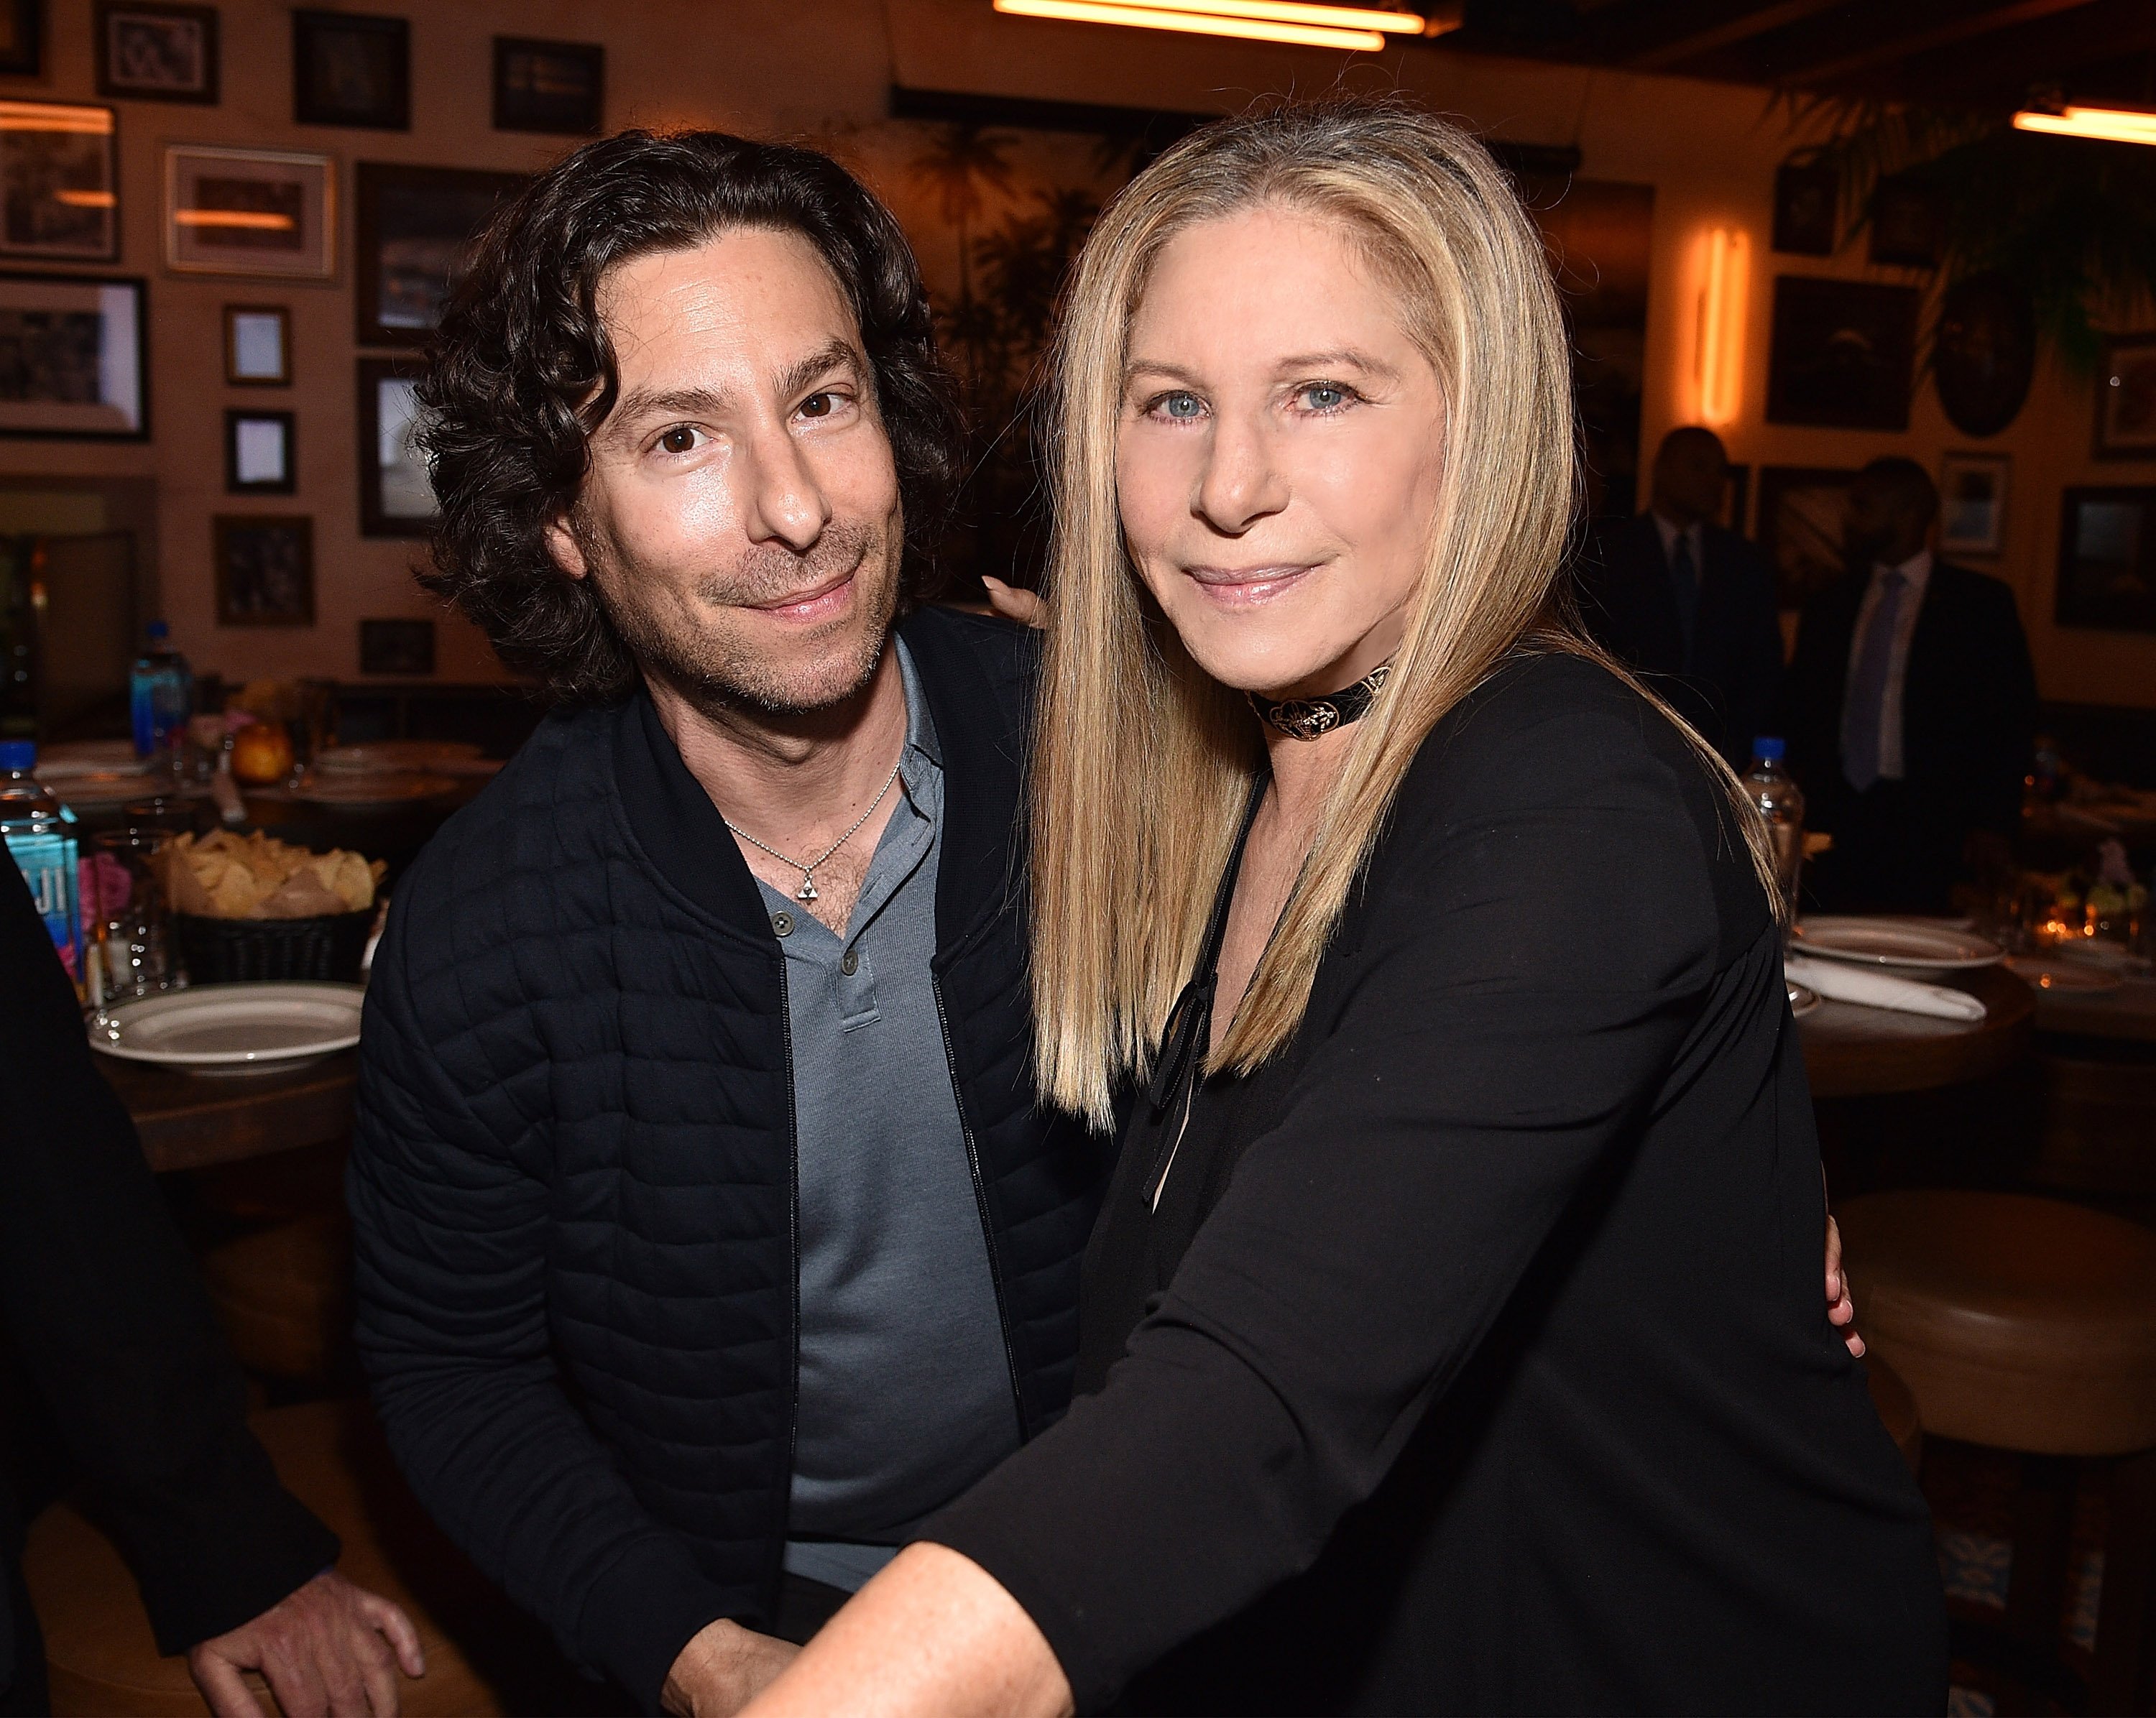 Jason Gould and Barbra Streisand attend Barbra Streisand's 75th birthday at Cafe Habana on April 24, 2017 in Malibu, California | Source: Getty Images